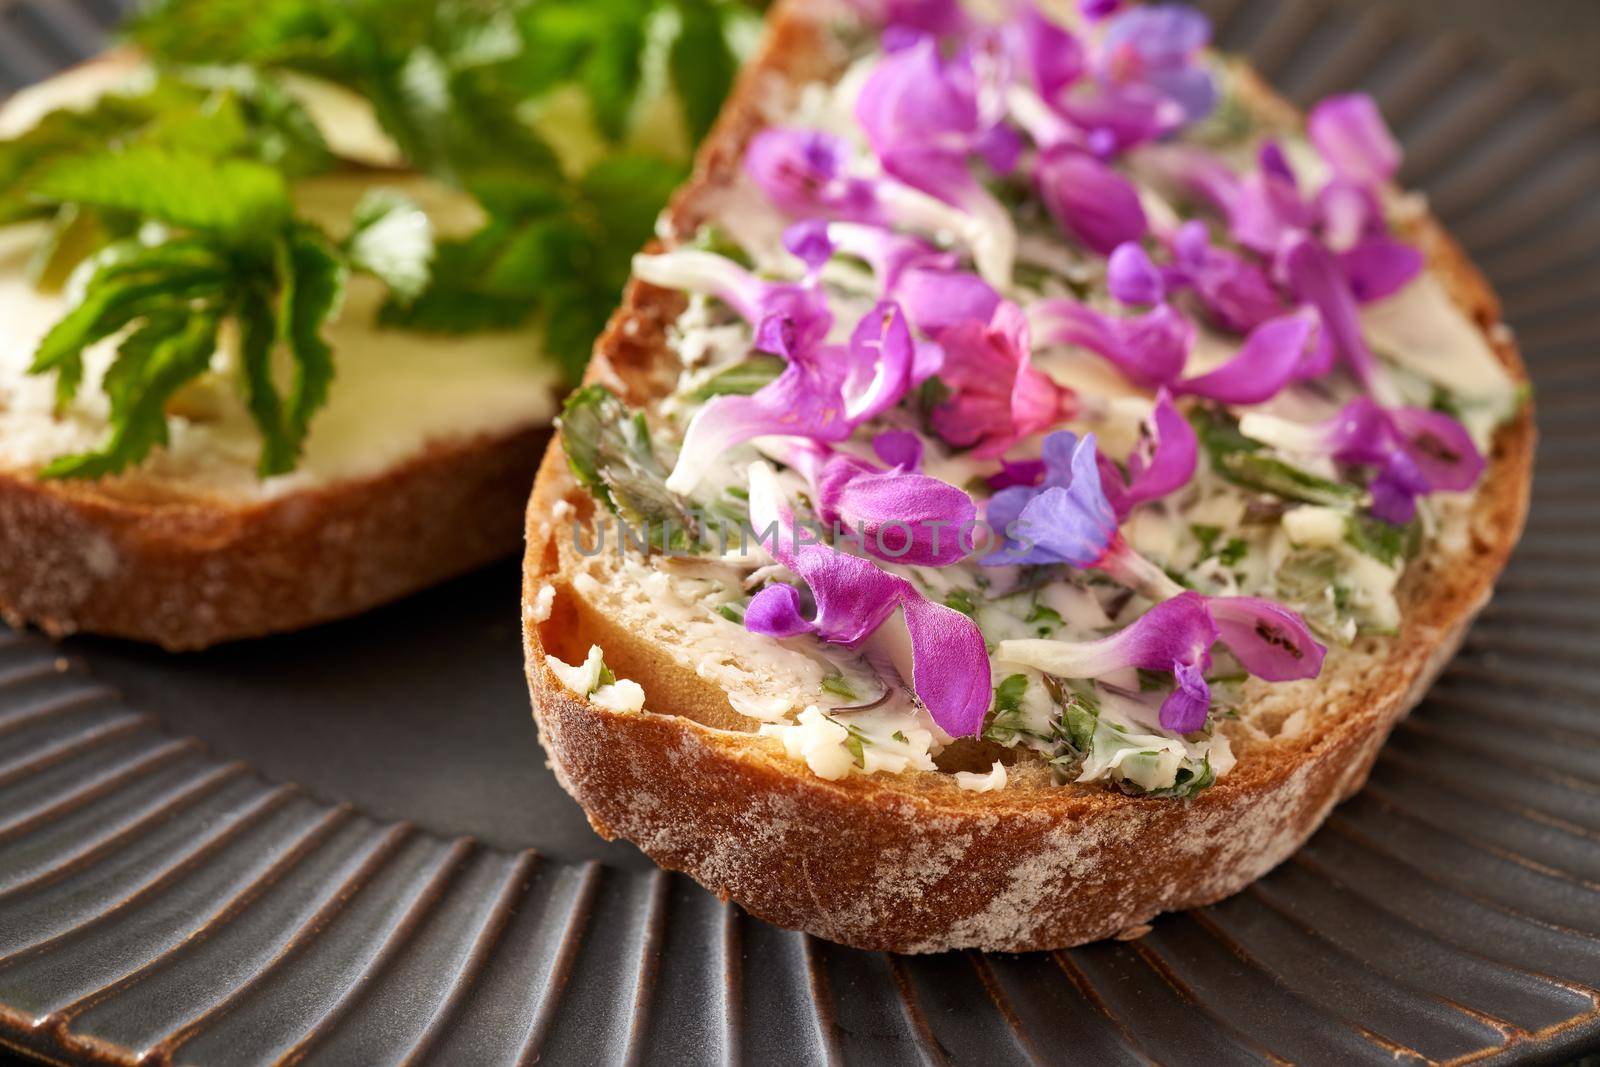 A slice of sourdough bread with butter and purple dead-nettle and lungwort flowers - wild edible spring plants by madeleine_steinbach